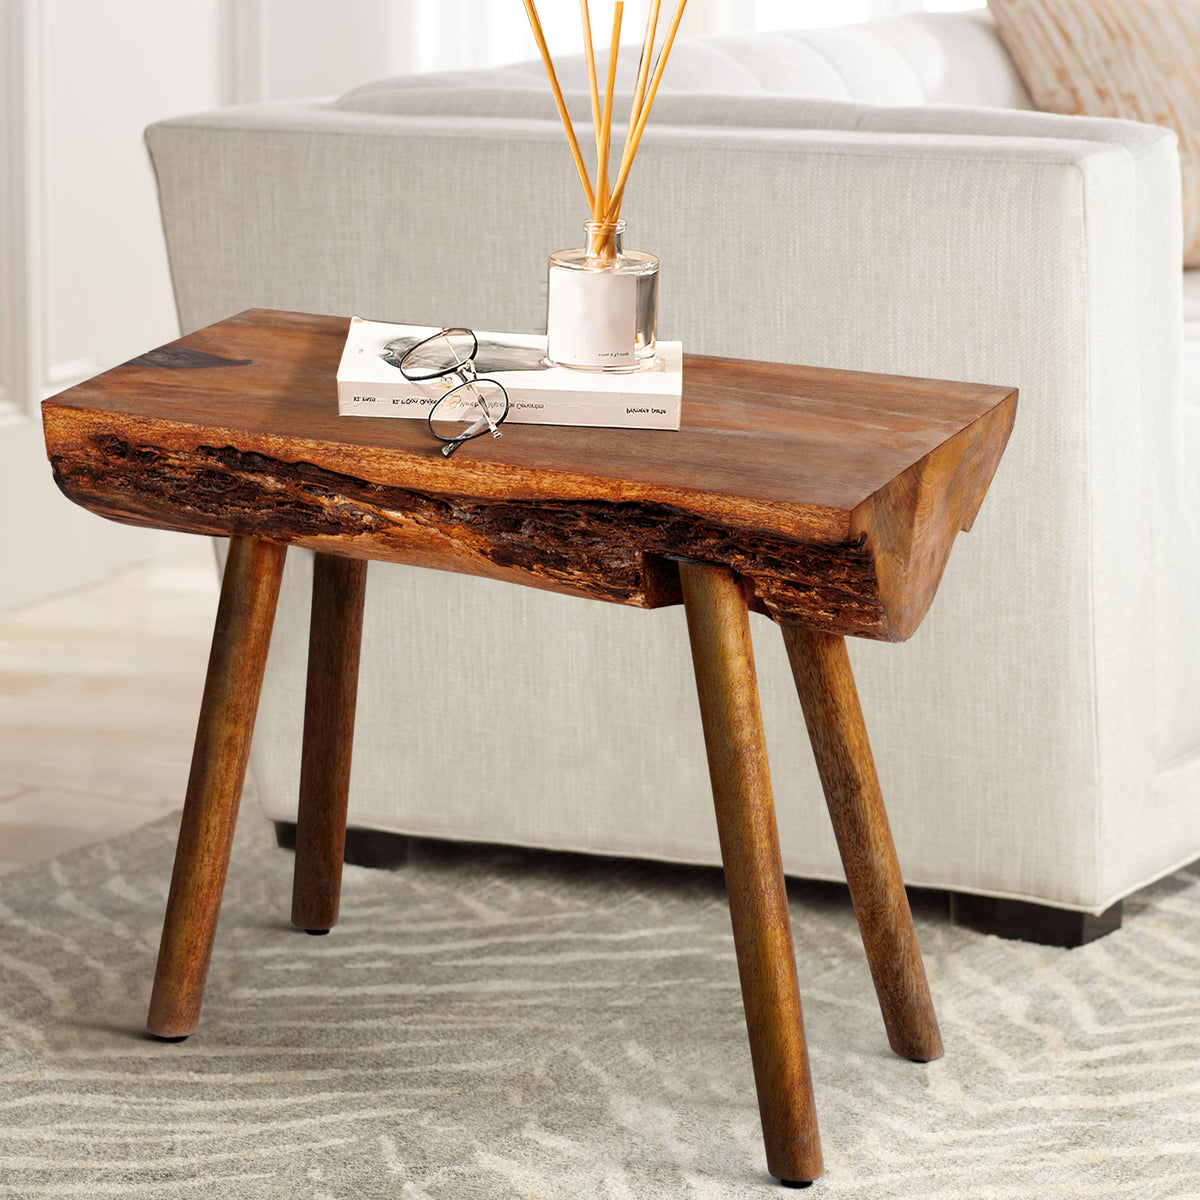 18 Inch Rectangular Mango Wood Accent Side Table with Live Edge Log Top, Warm Brown - UPT-272014